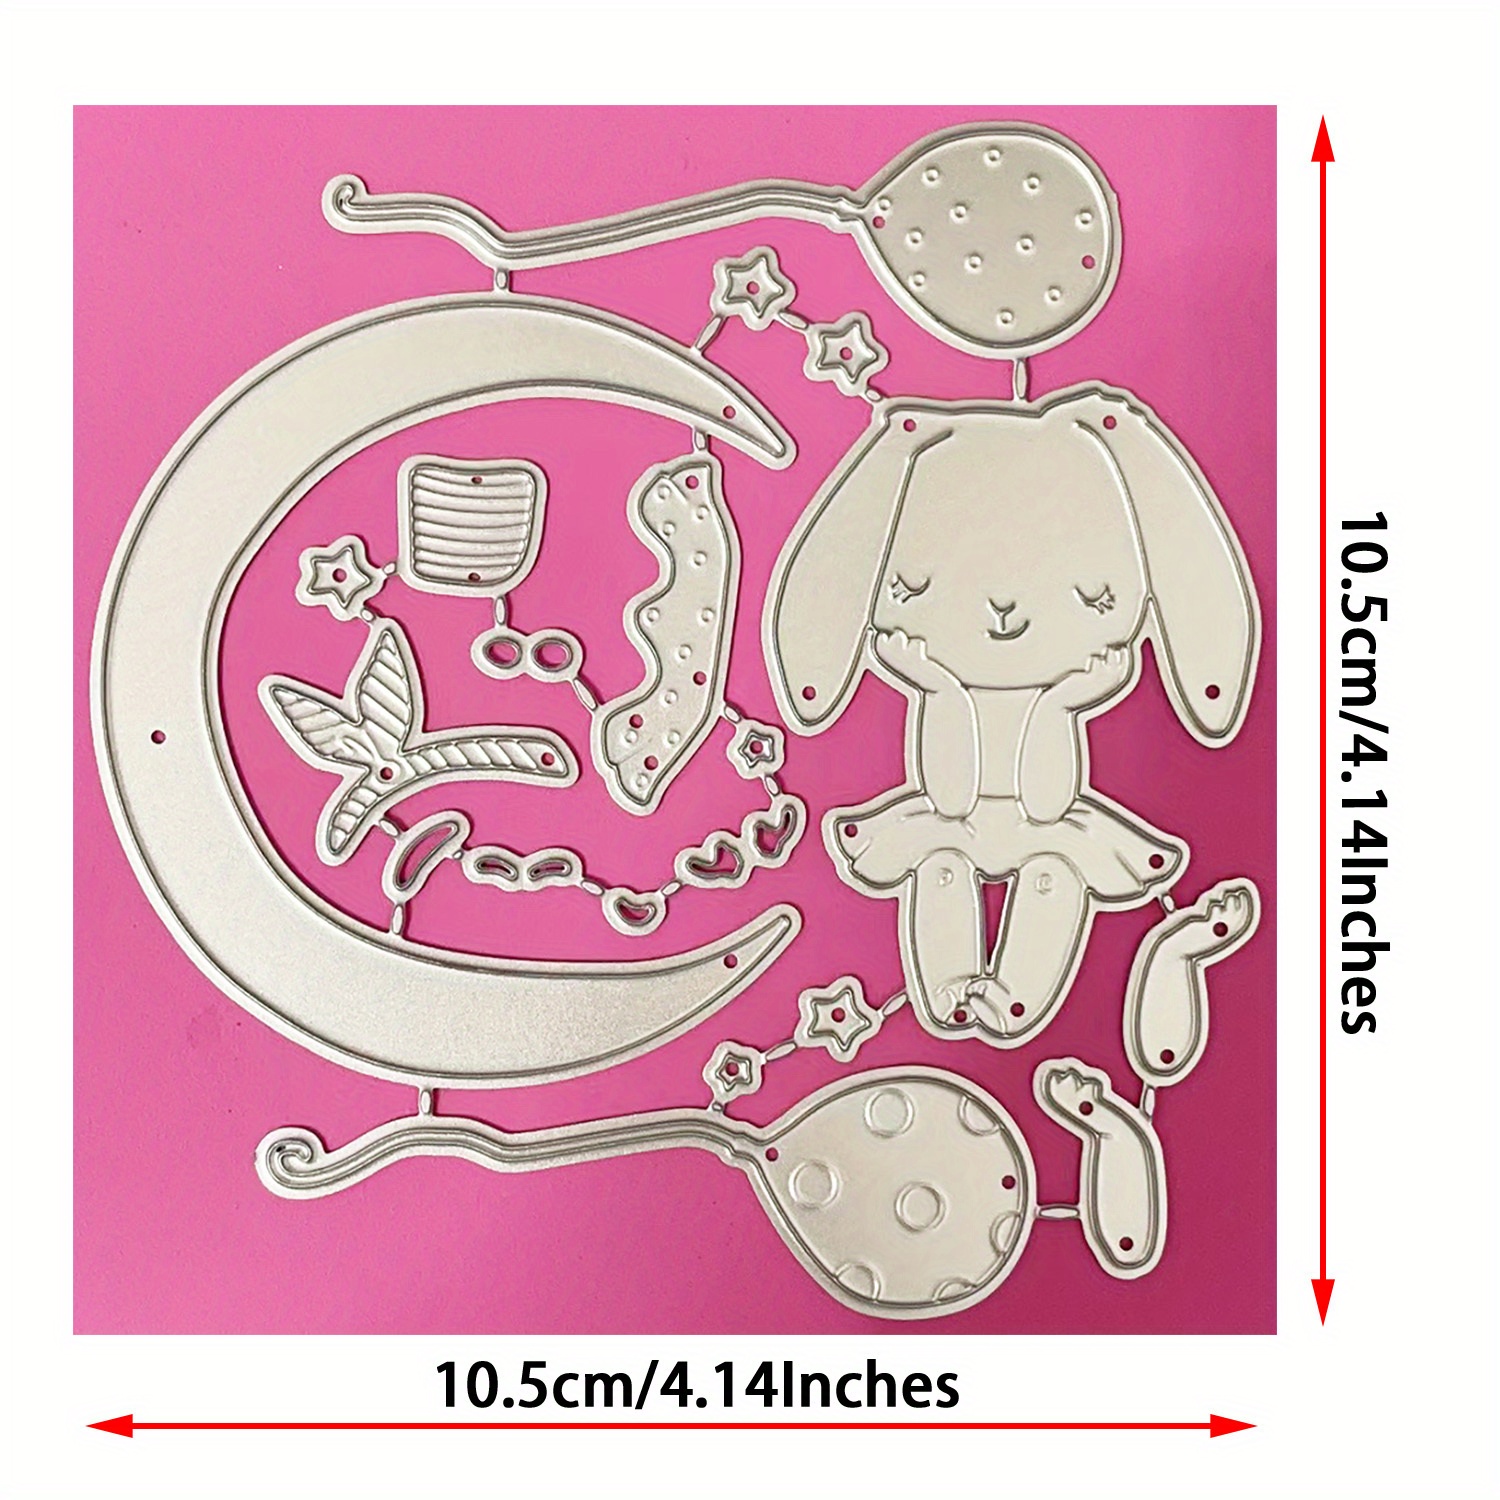 KSCRAFT Bunny Bows Metal Cutting Dies Stencils for DIY Scrapbooking/Photo  Album Decorative Embossing DIY Paper Cards (Small Size)